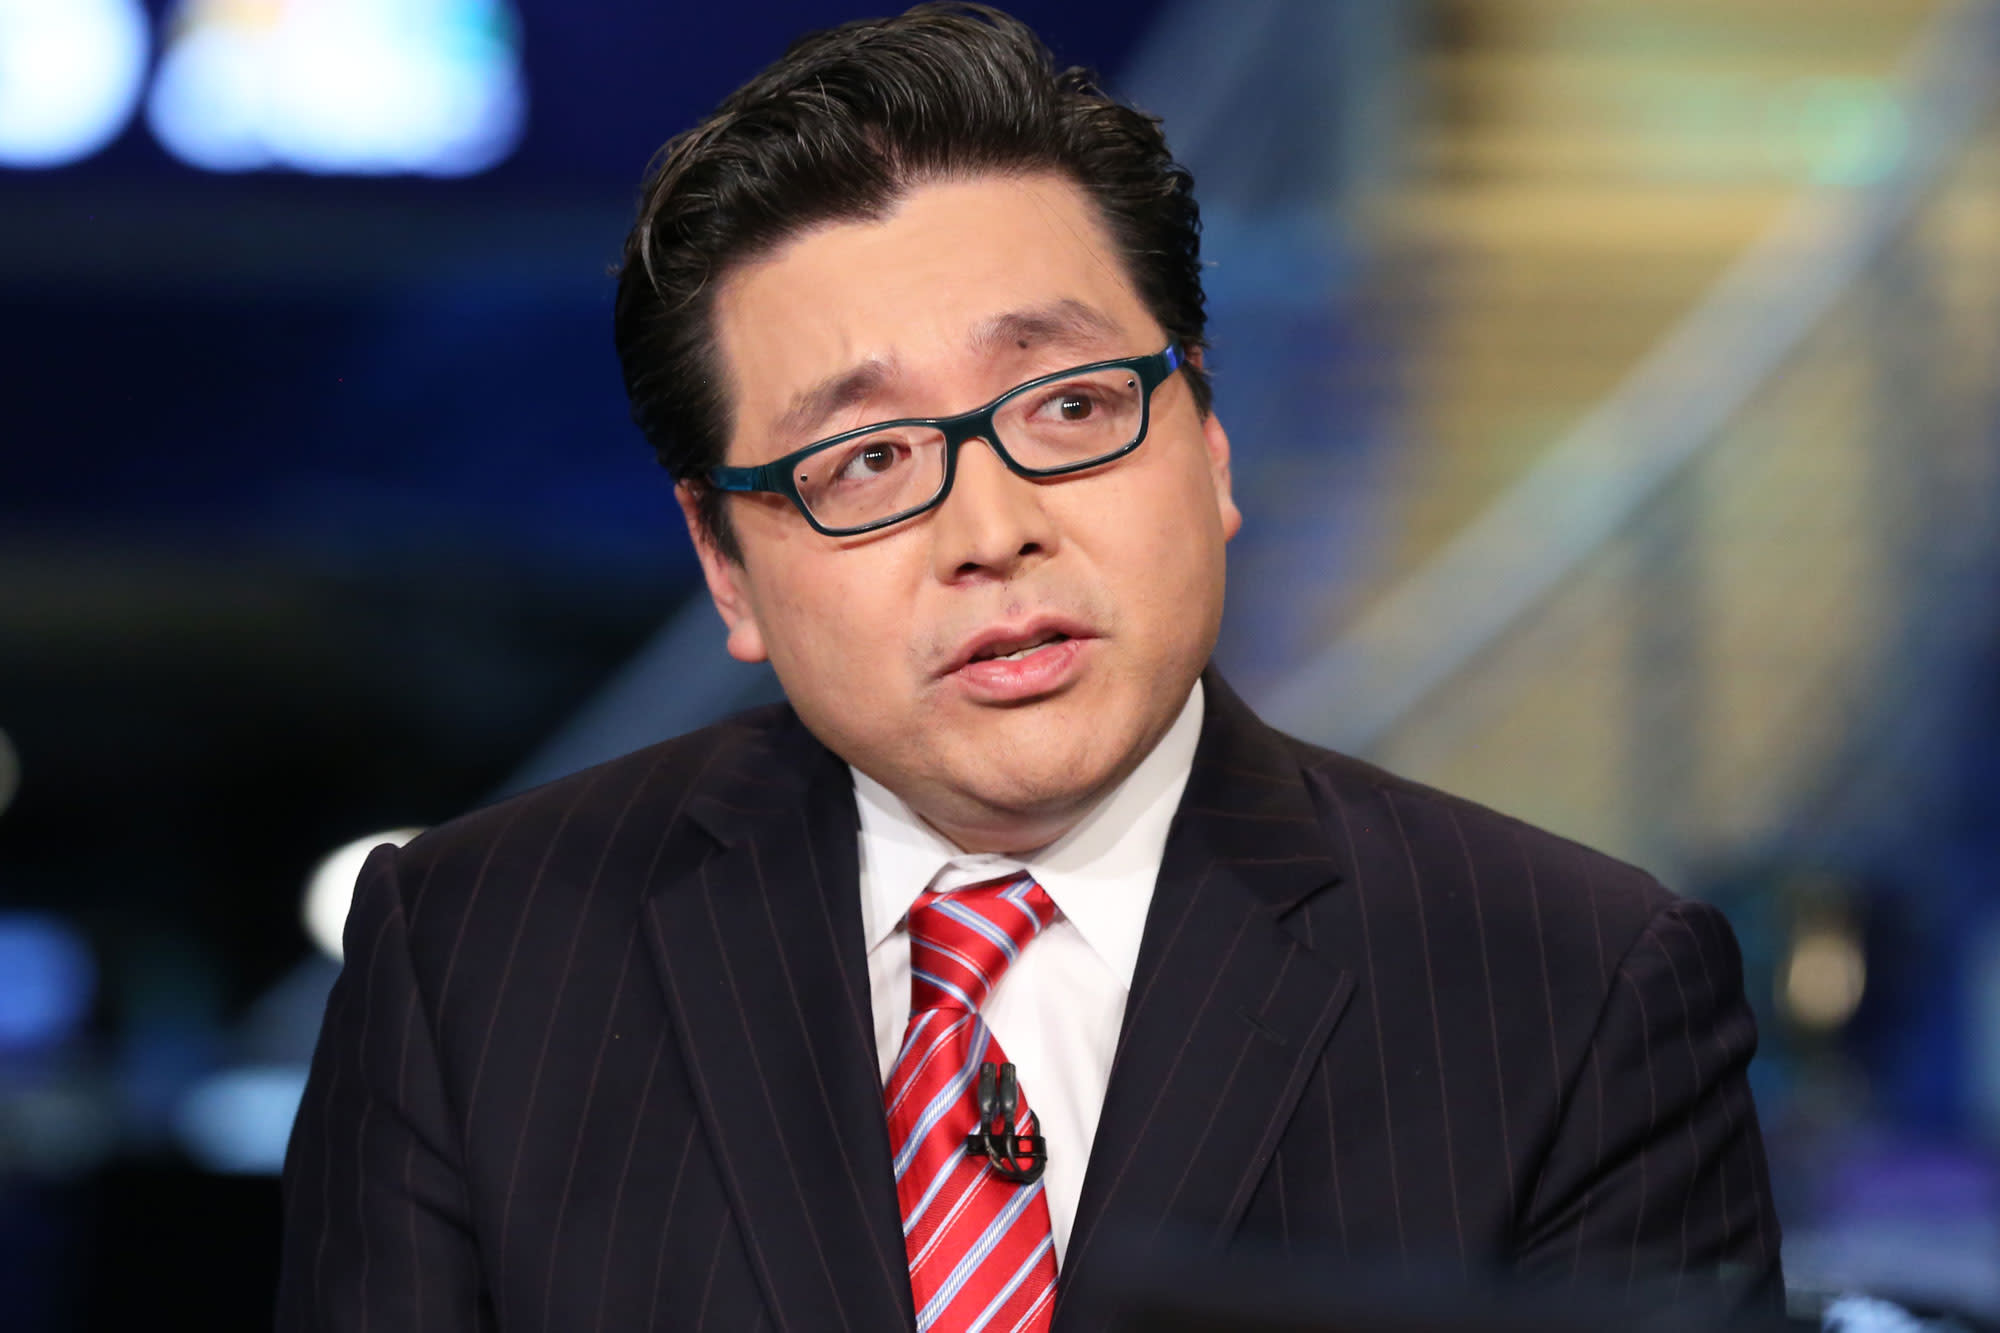 Tom Lee says stocks may be primed for a big rally. Here's why